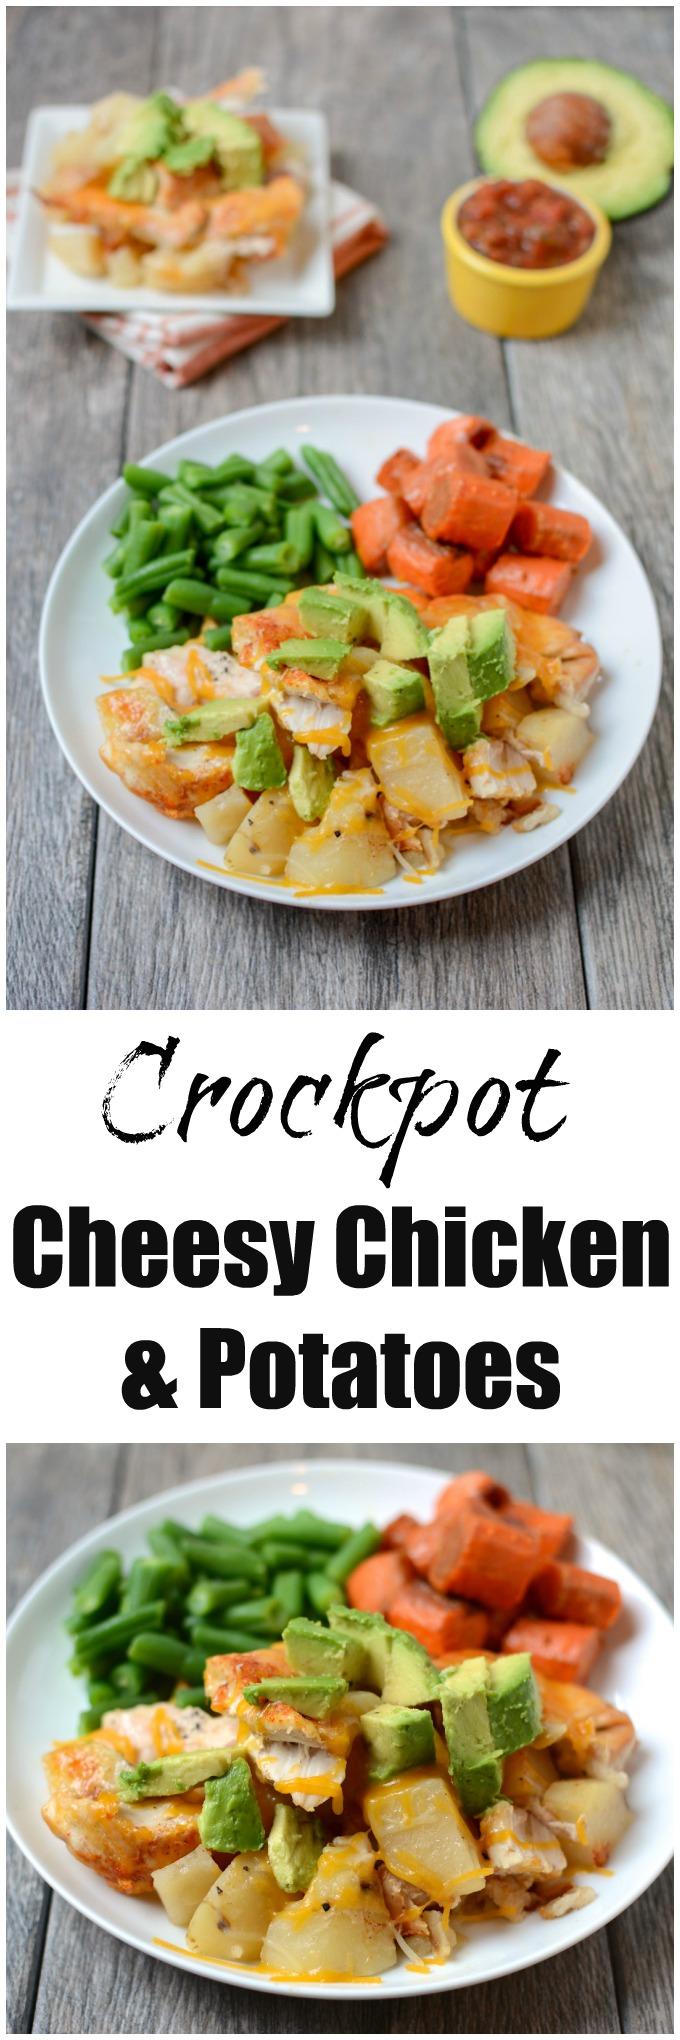 This recipe for Slow Cooker Cheesy Chicken and Potatoes is a perfect weeknight dinner. Let the crockpot do all the work and enjoy a flavorful meal after a busy day.